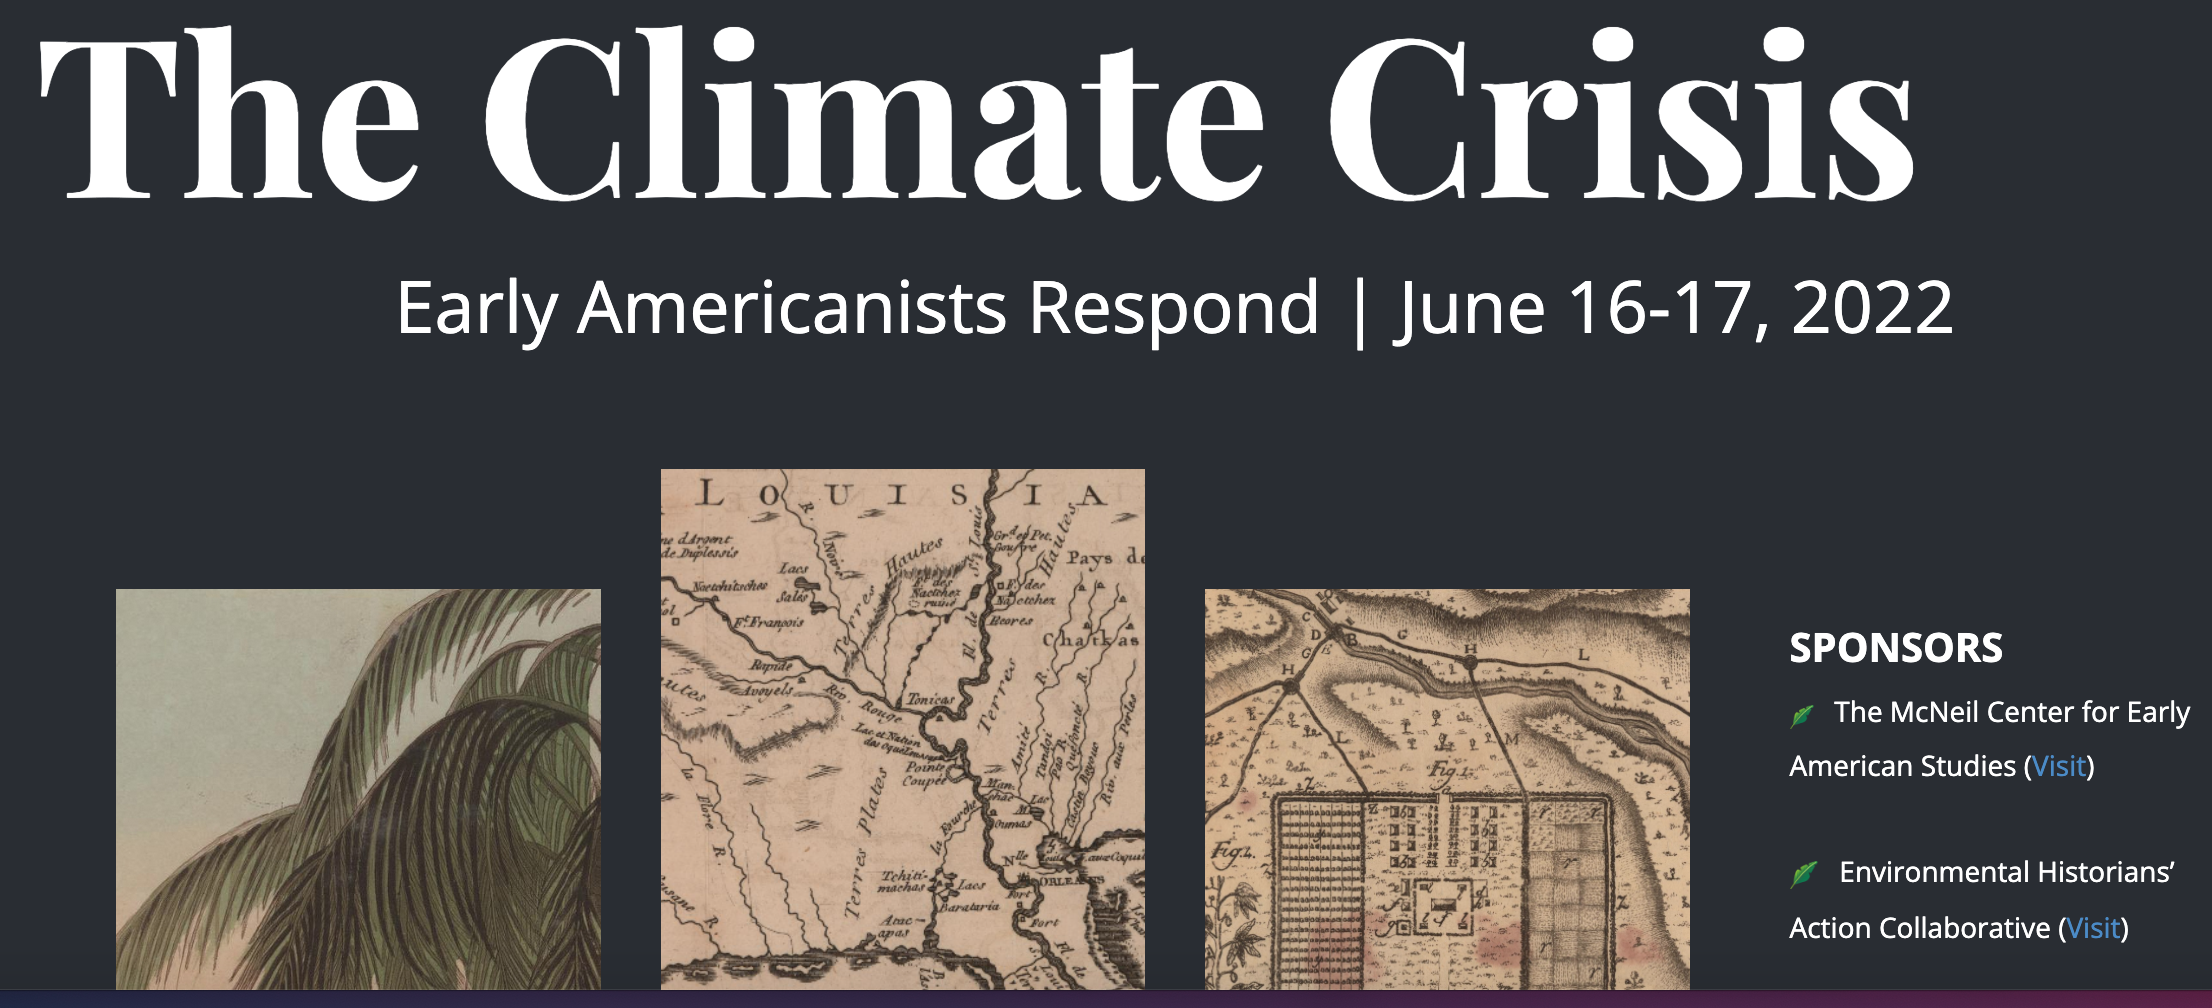 Researchers of Early America Consider How to Respond to the Climate Crisis at Upcoming Conference